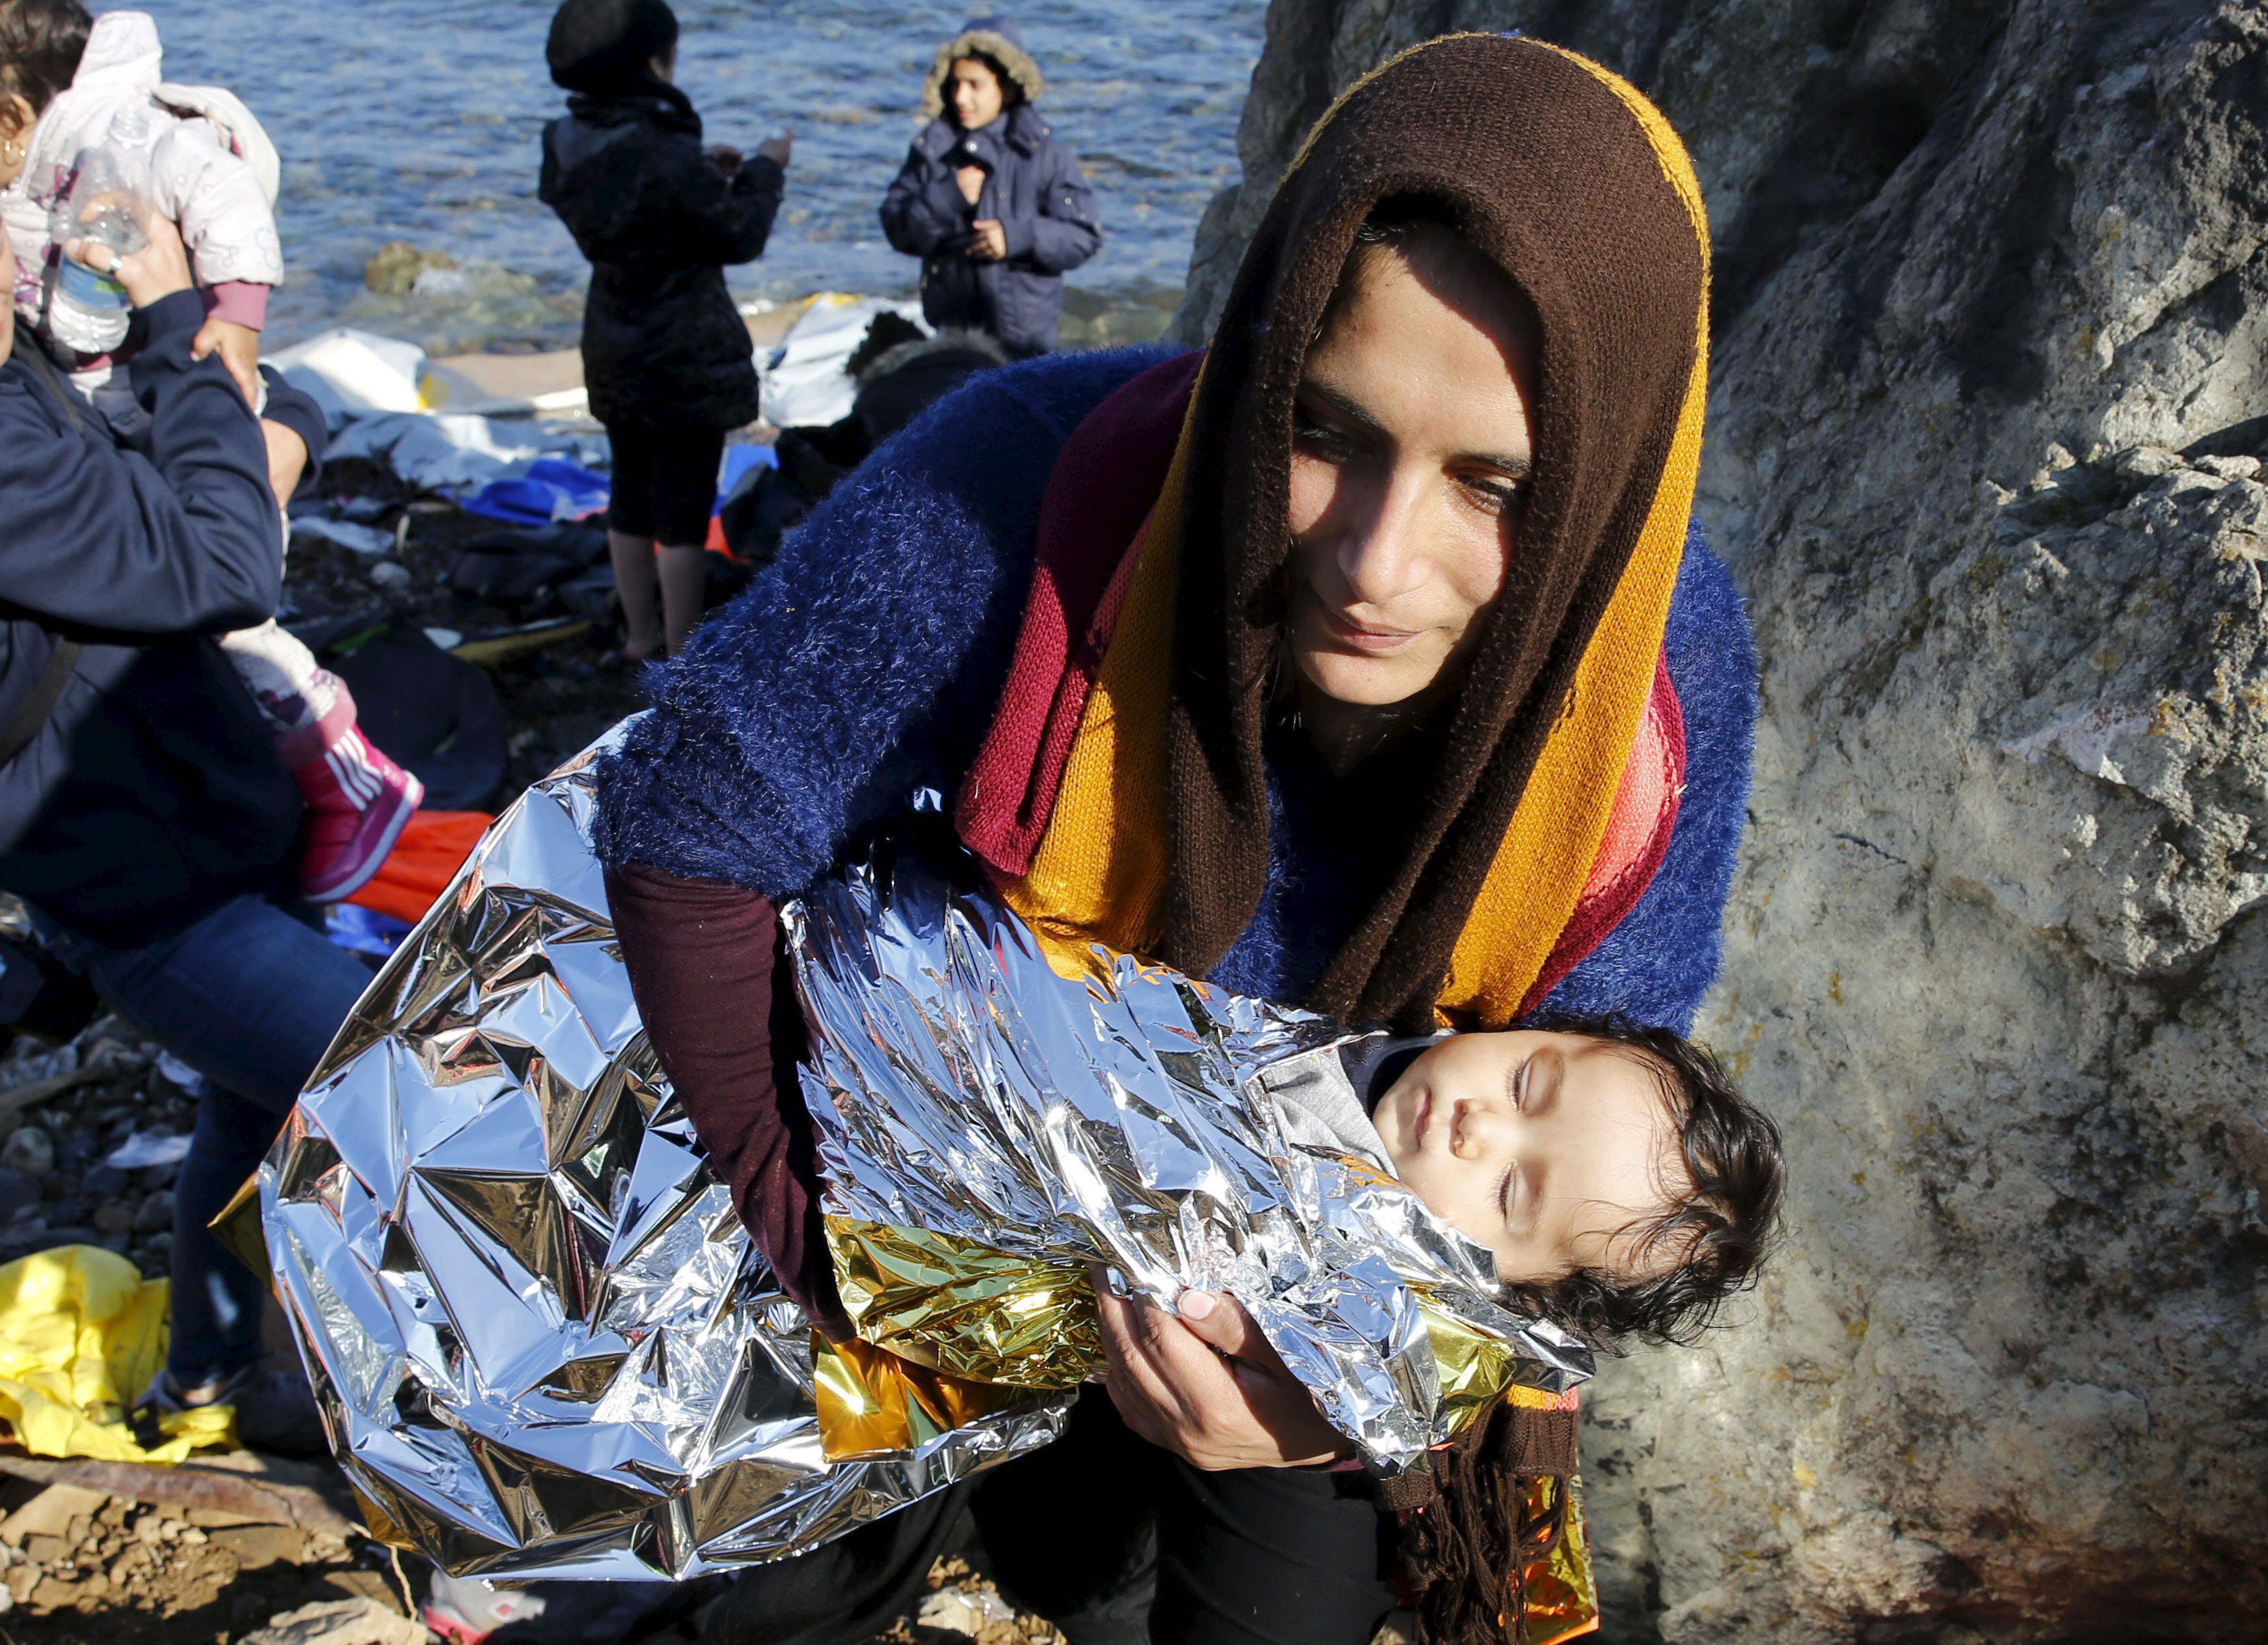 An Afghan migrant carries her baby after arriving by a raft on the Greek island of Lesbos